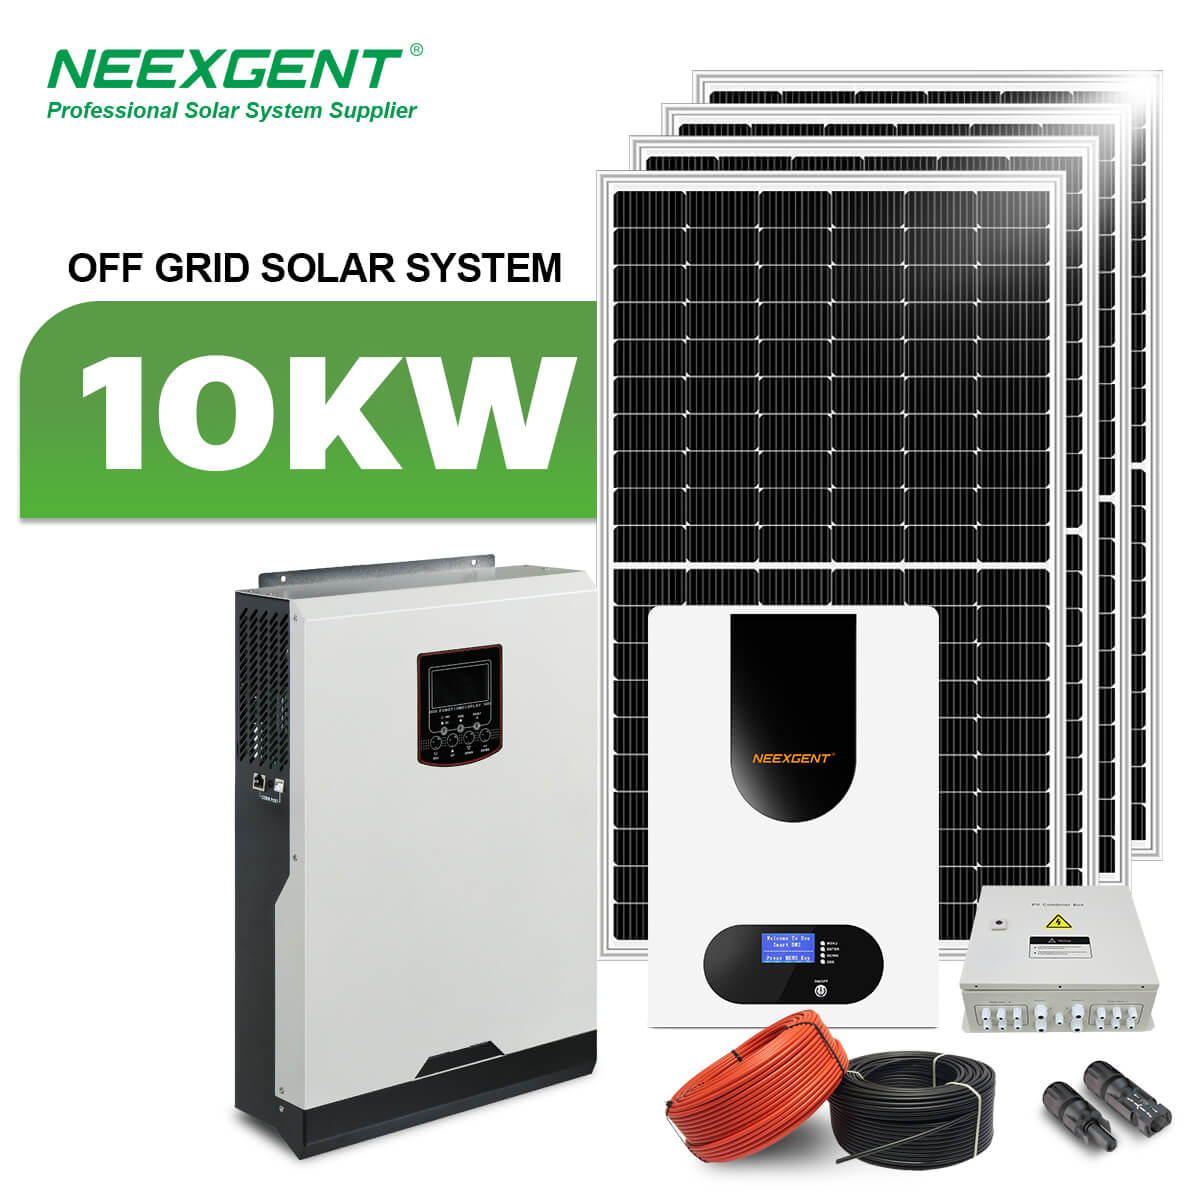 Neexgent 10kw Customized Lithium Battery Off Grid Solar Panels Home 10kw Rooftop Solar System